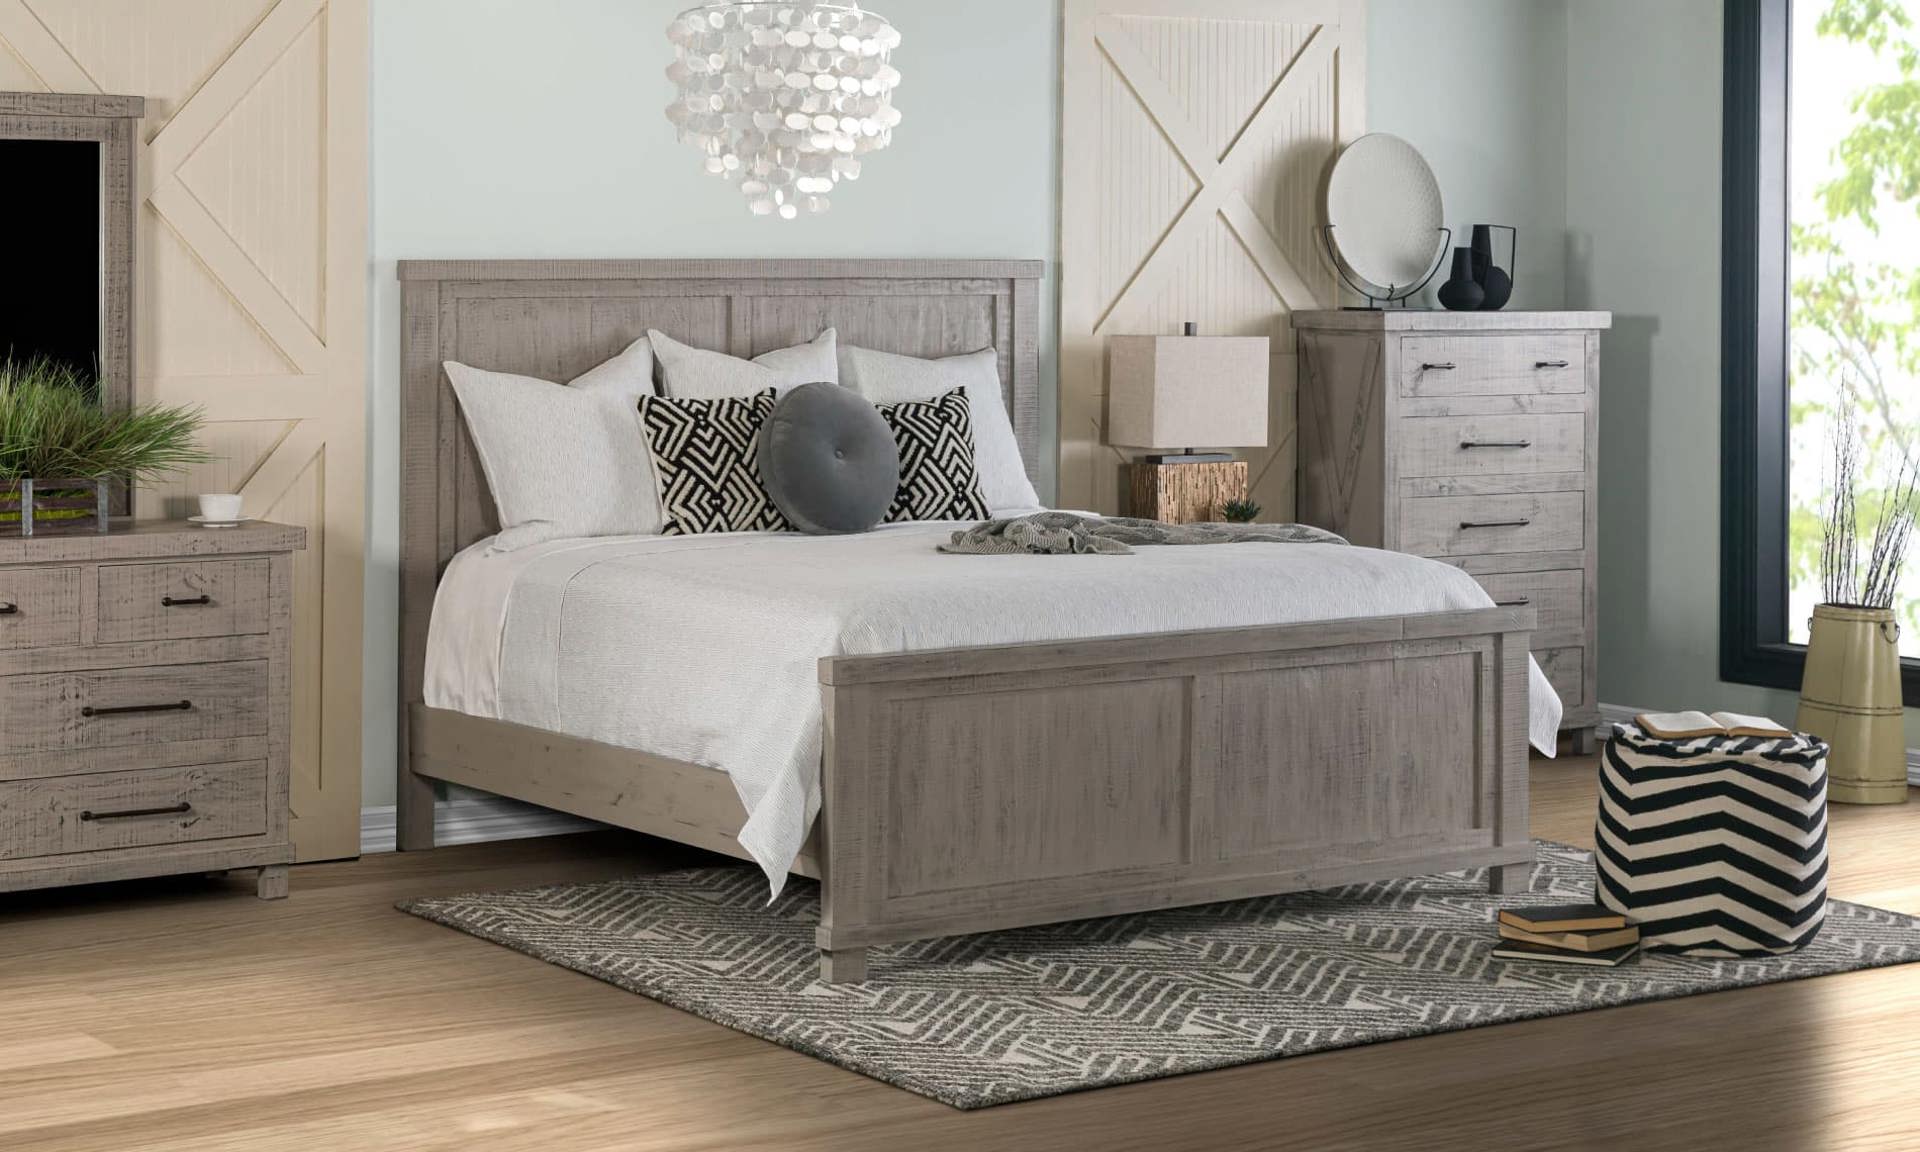 Beautiful neutral toned bedroom set featuring a bed, dresser and chest in a grey tone.